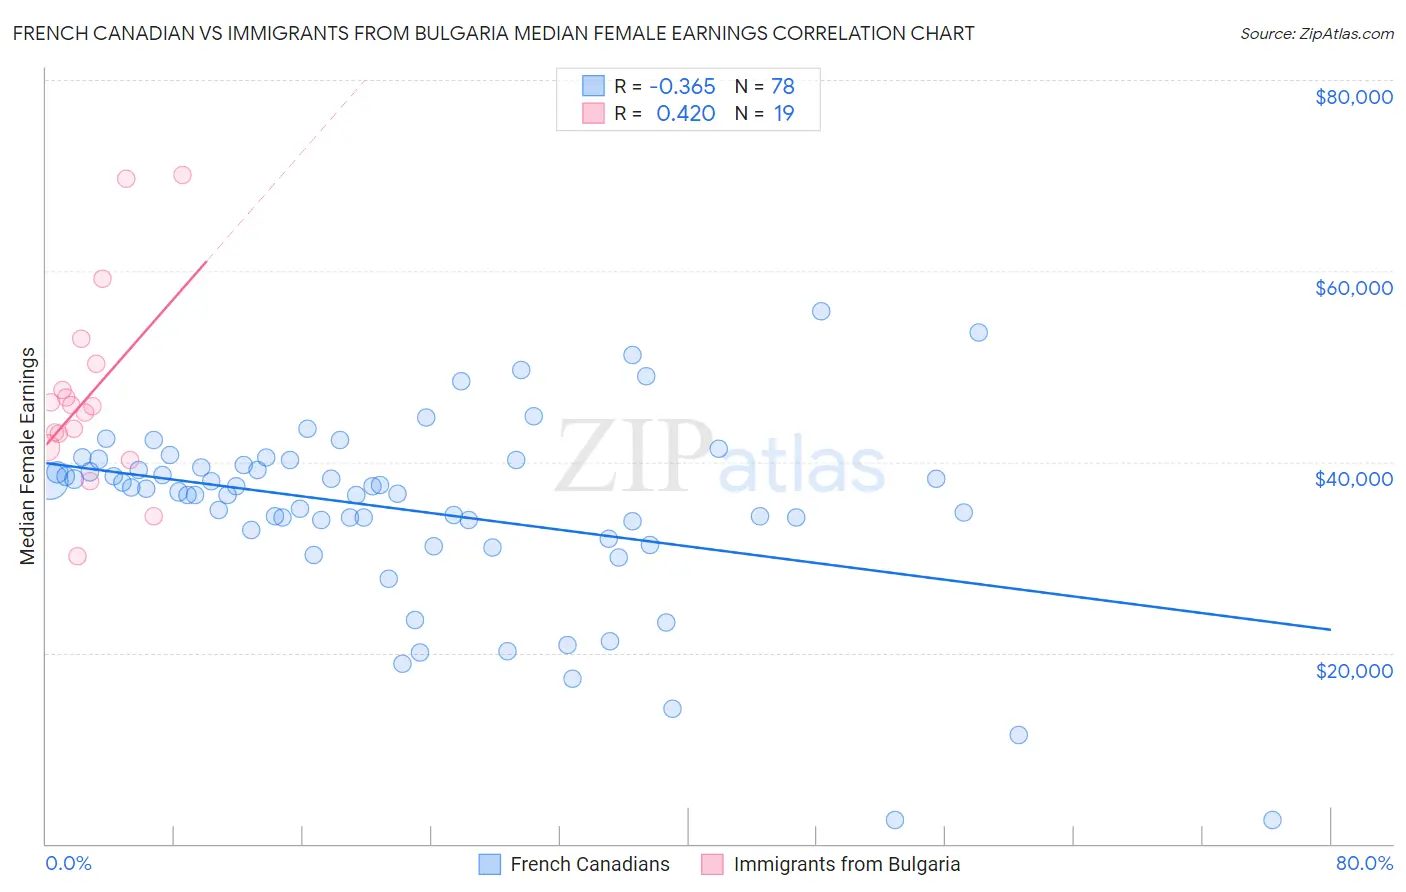 French Canadian vs Immigrants from Bulgaria Median Female Earnings